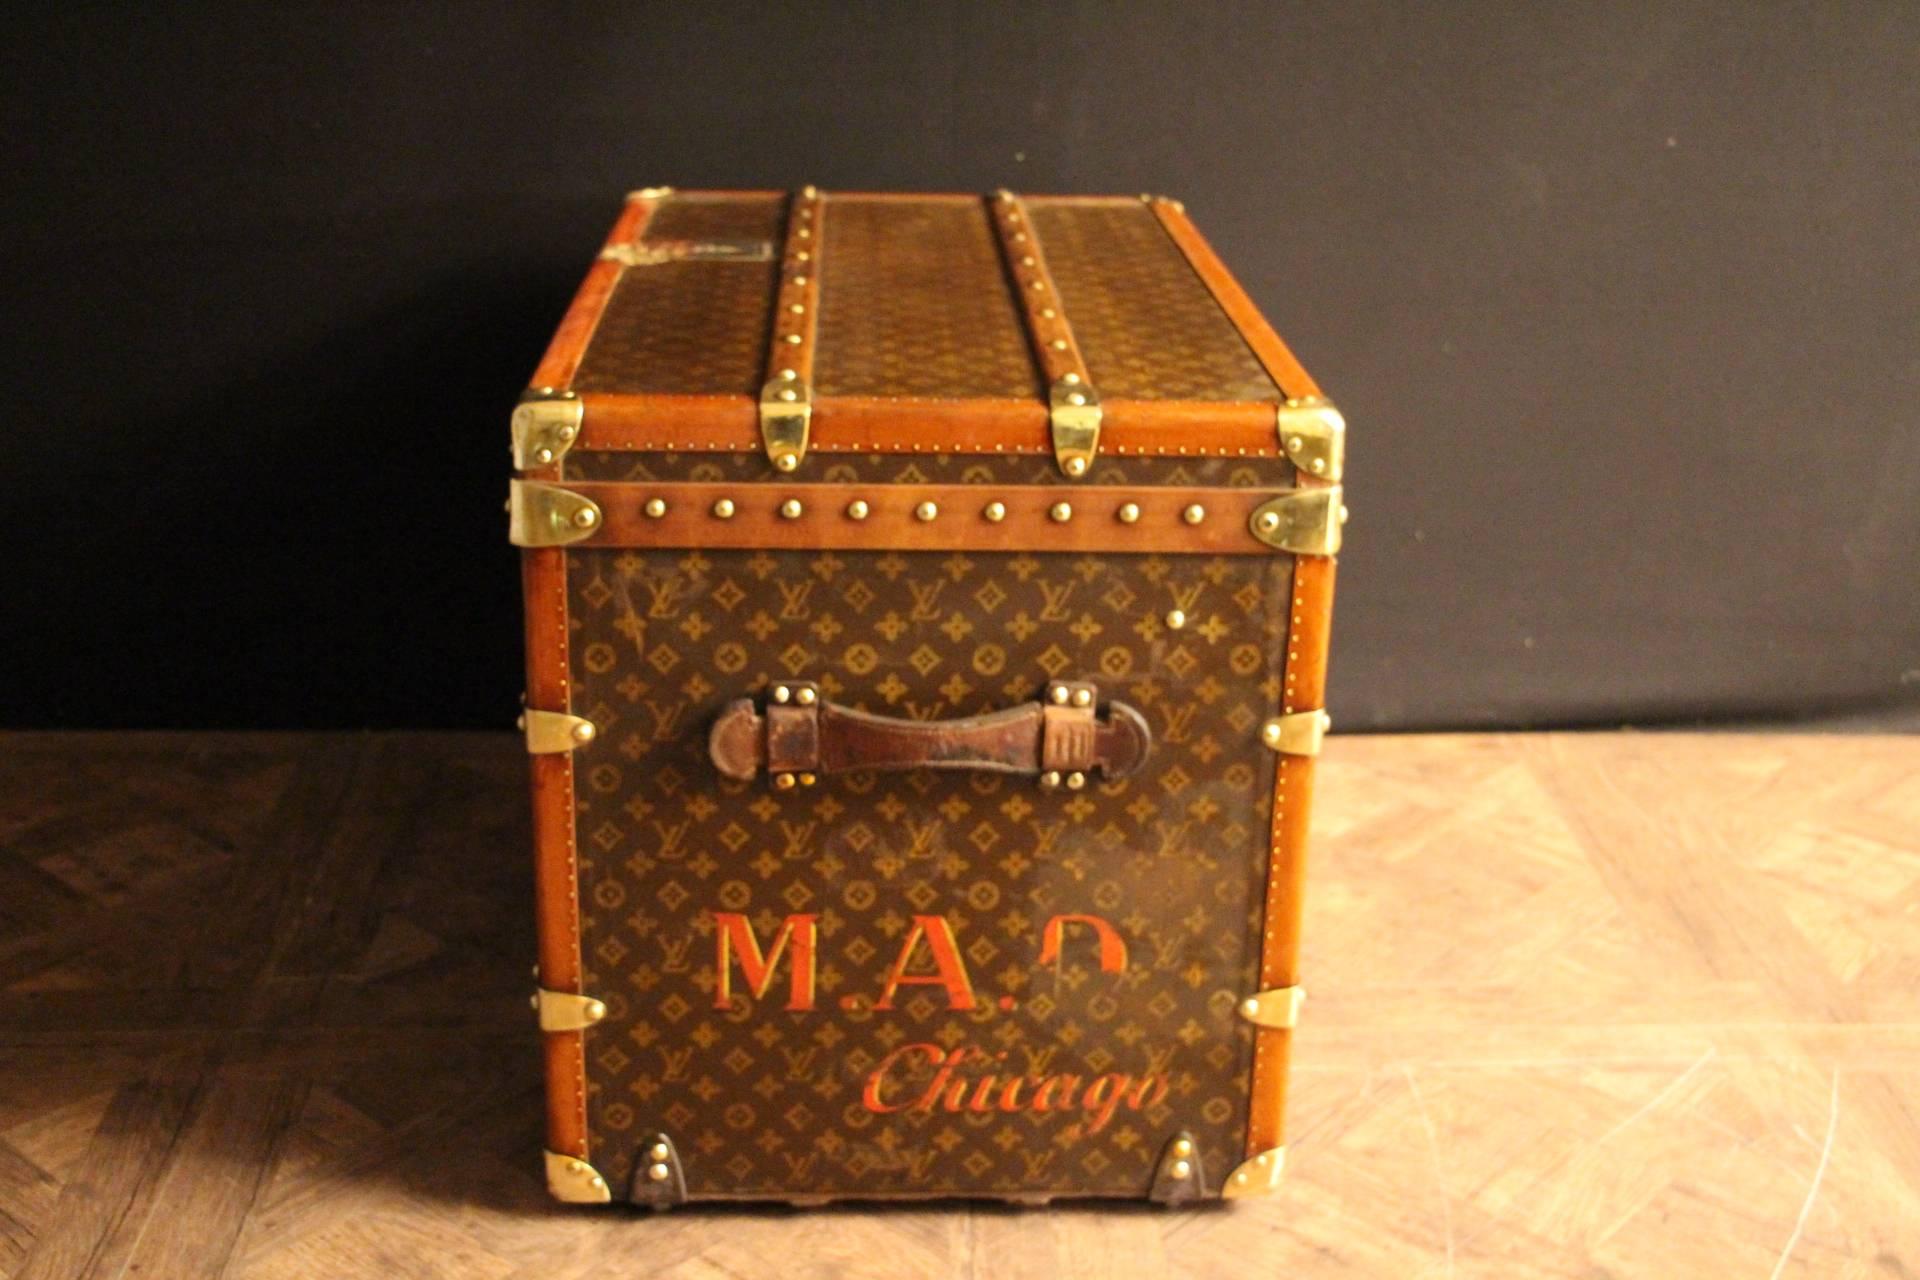 This gorgeous Louis Vuitton hat trunk features monogramm canvas, LV, lozine trim, stamped brass locks, LV stamped brass studs, brass corners and its original leather side handles. It has got a warm and elegant patina.
Its interior is breathtaking.